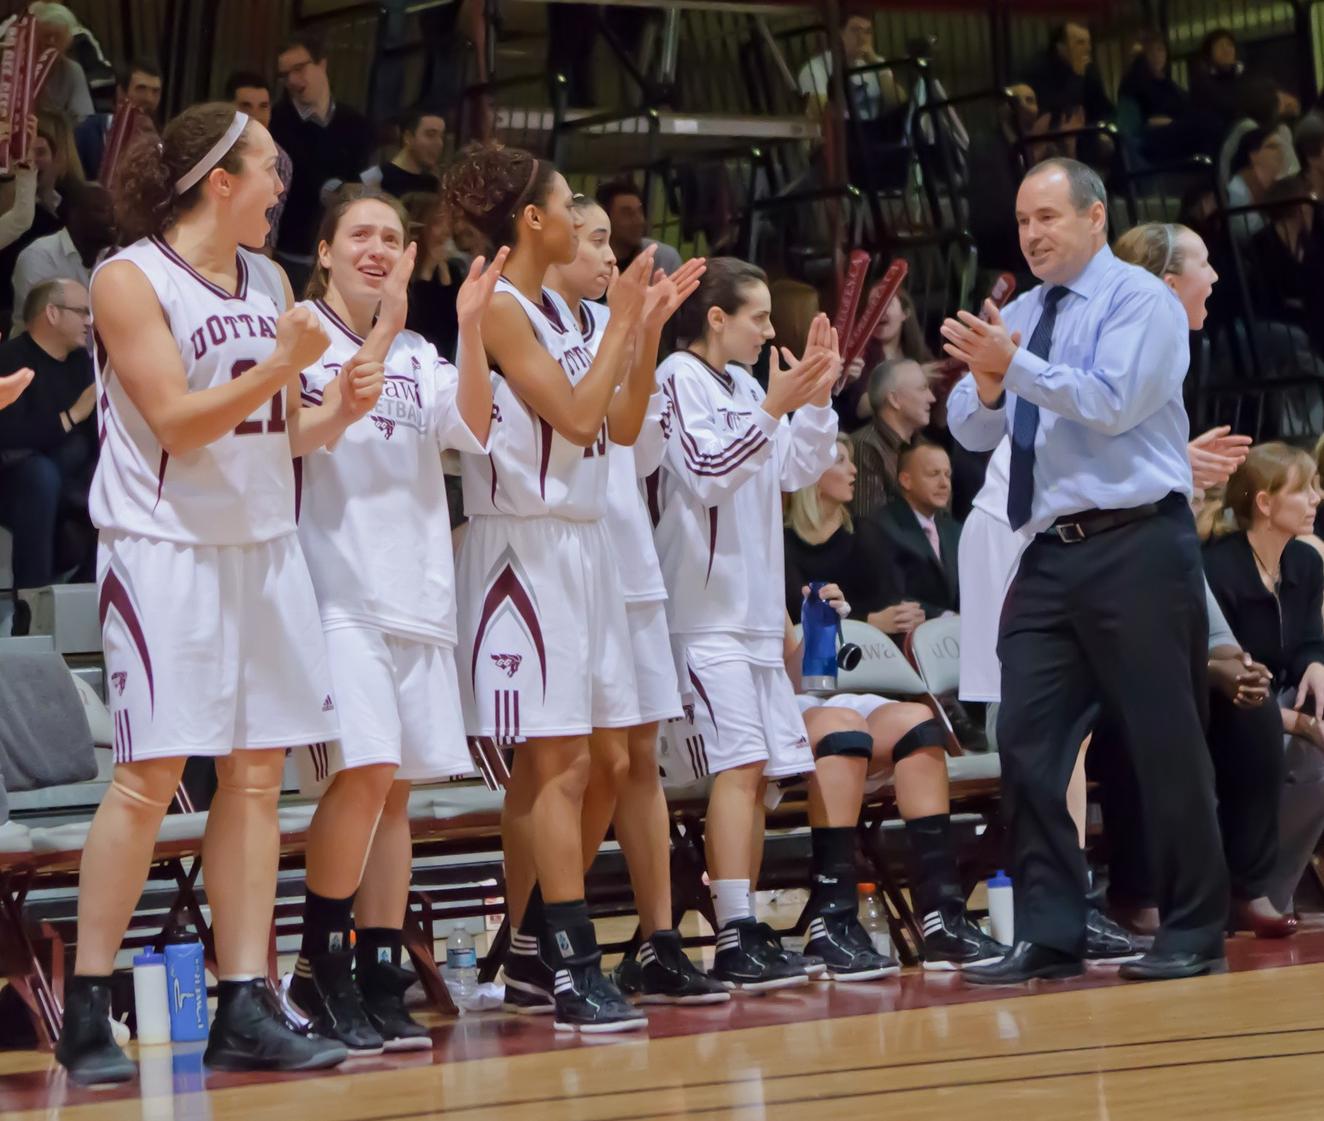 Women's basketball players and Andy Sparks cheering on the bench.